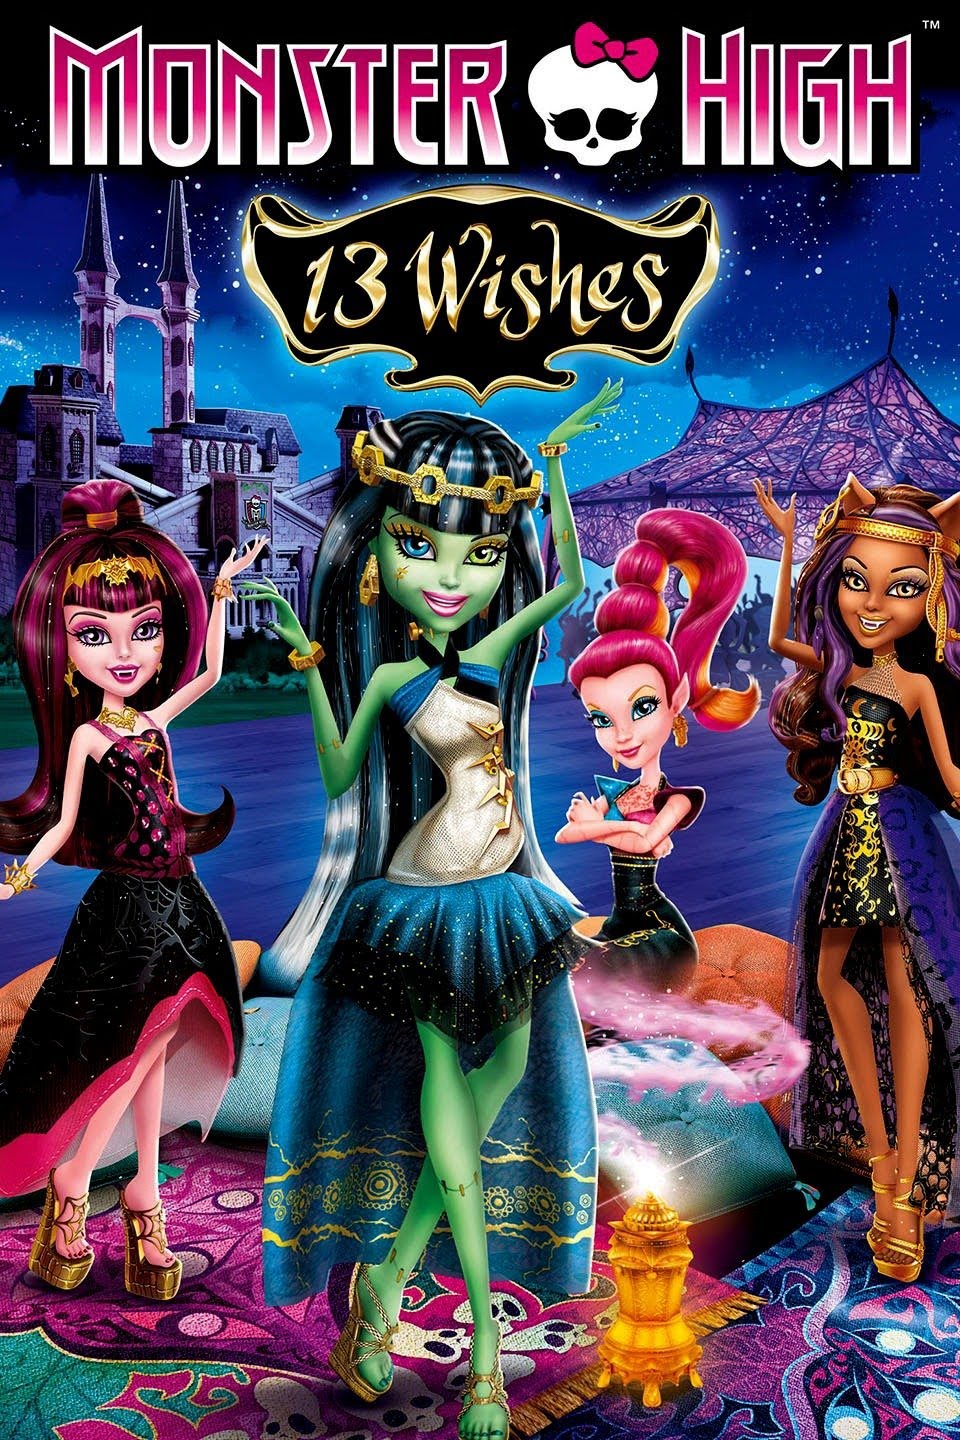 13-wishes-tv-special-monster-high-wiki-fandom-powered-by-wikia